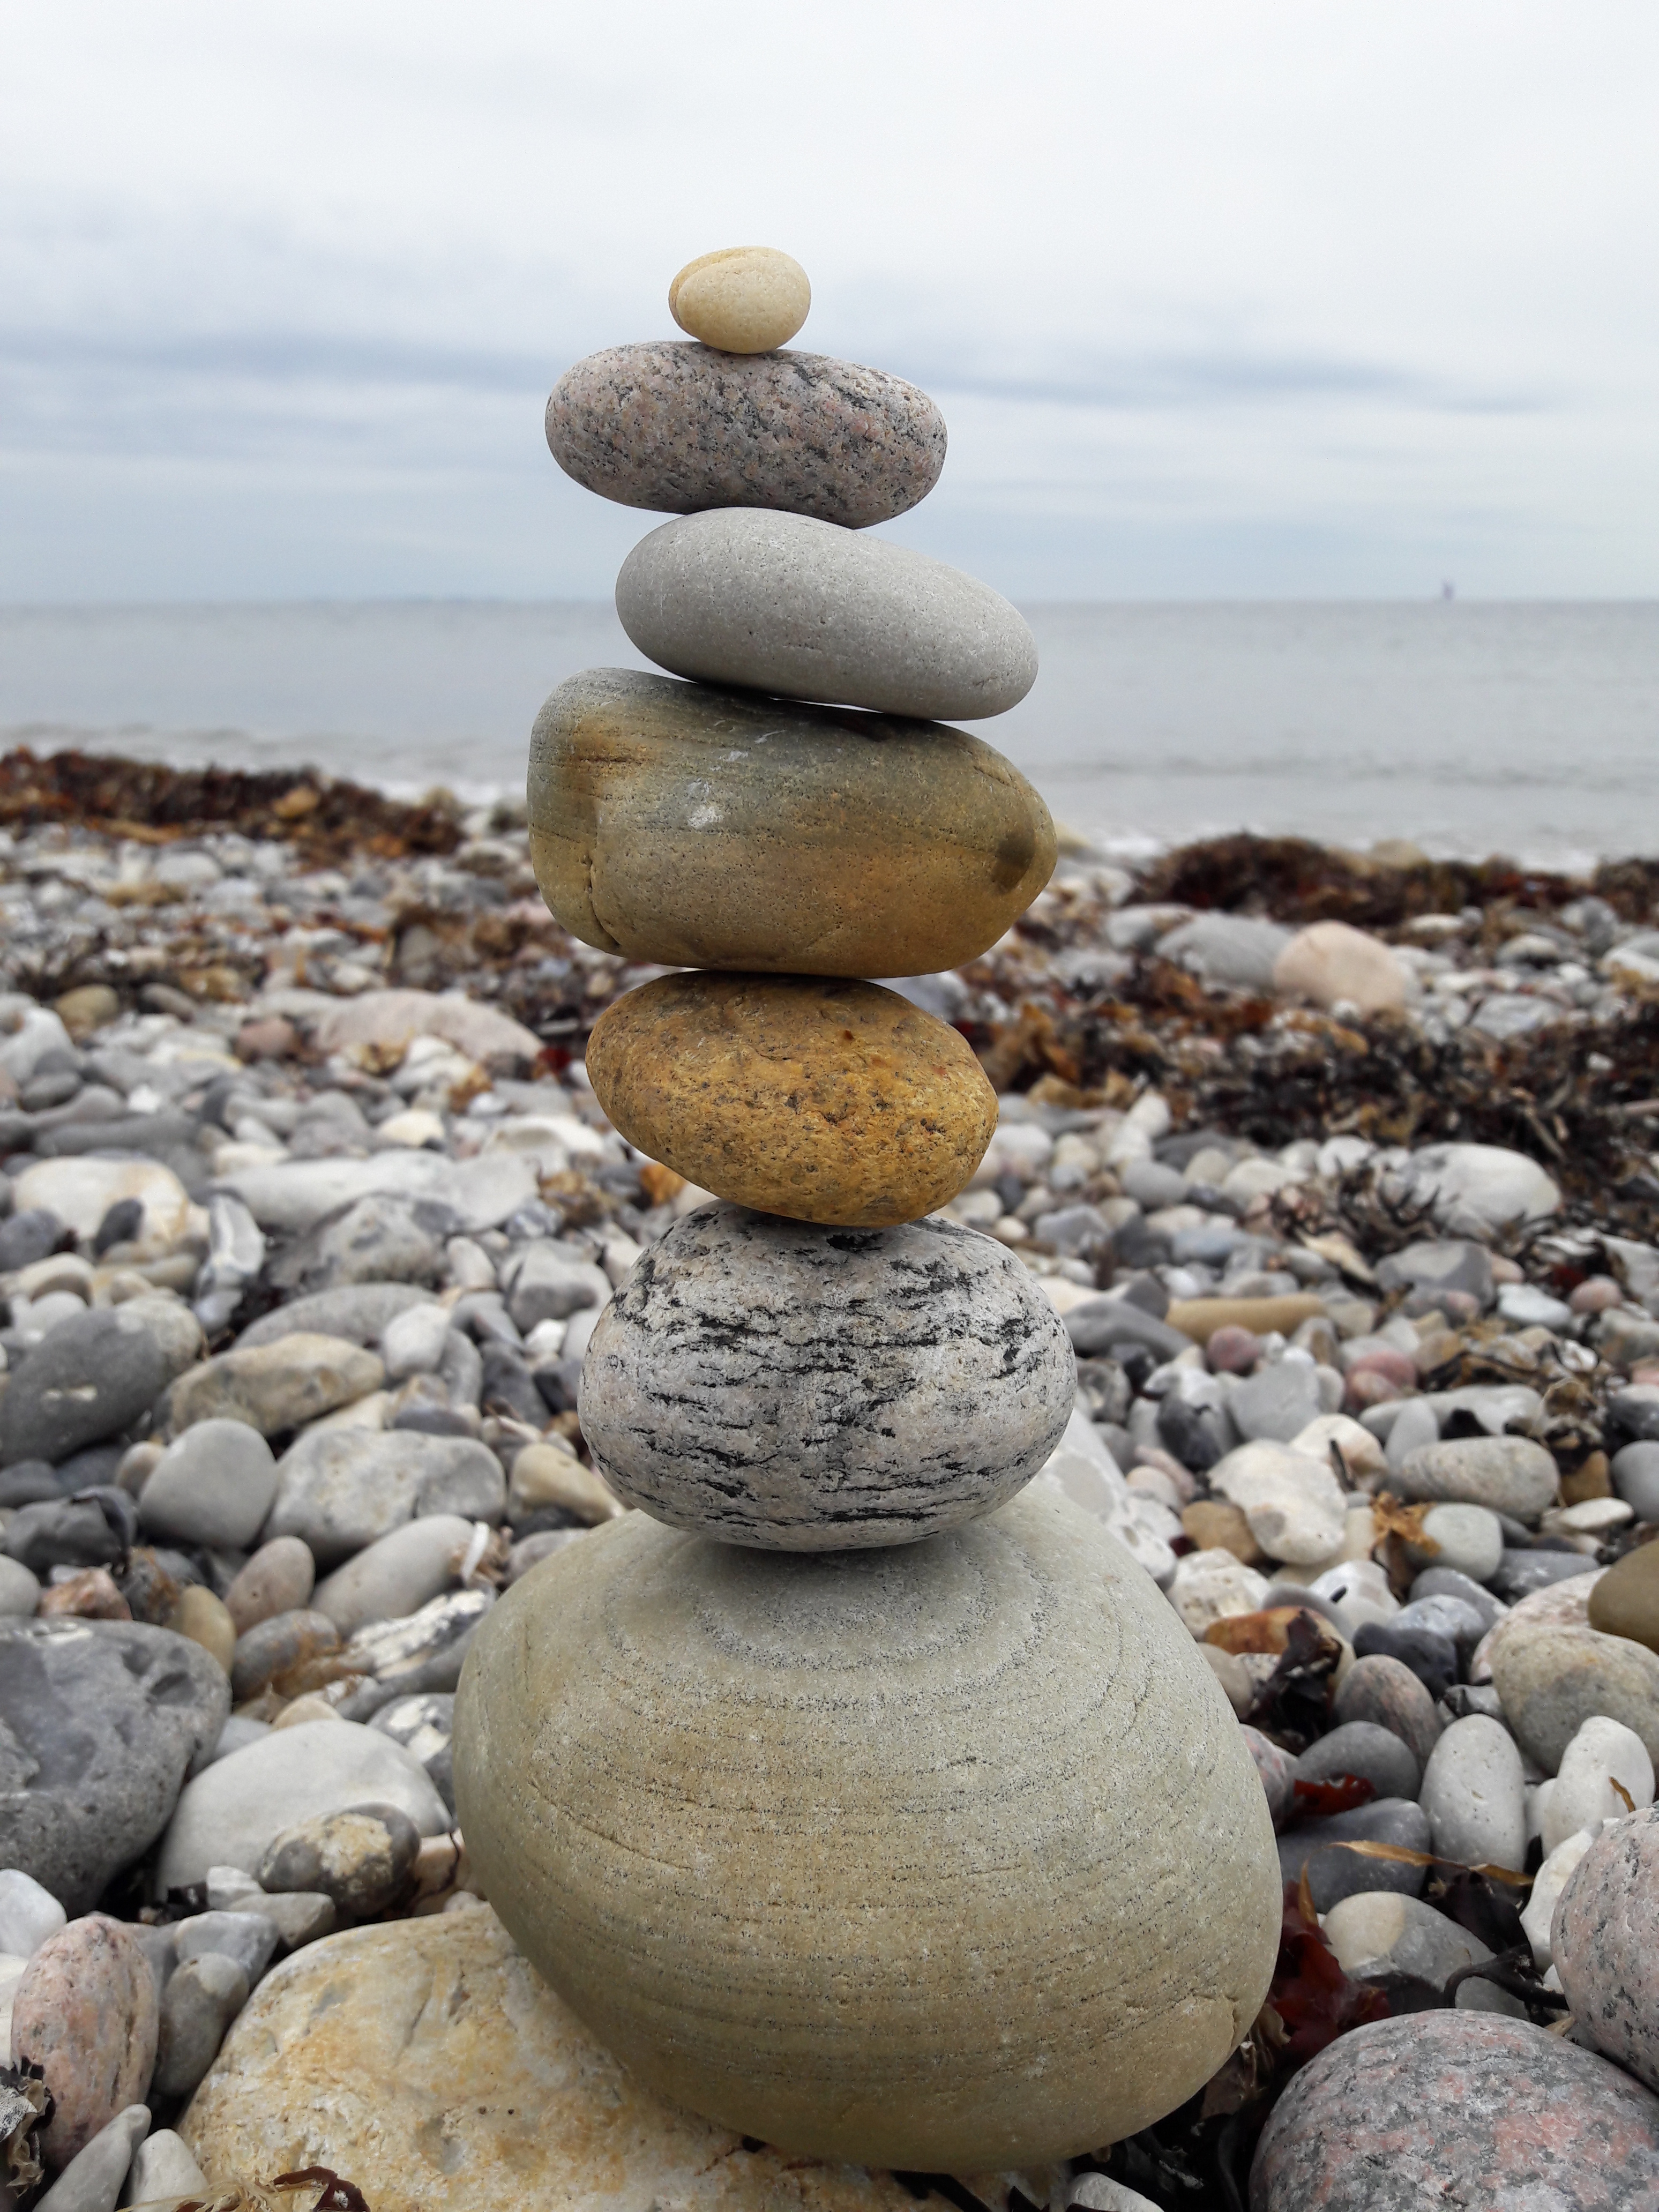 The photo depicts a group of smooth, flat stones stacked atop each other on a sandy beach. The stones vary in shades of gray, brown, and tan, and are arranged in a way that suggests harmony and balance. Some stacks are simple, while others are more elaborate and intricate. This image evokes a sense of peace and tranquility, and could be associated with activities like mindfulness practice, meditation, or contemplative therapy such as DBT therapy in CT.